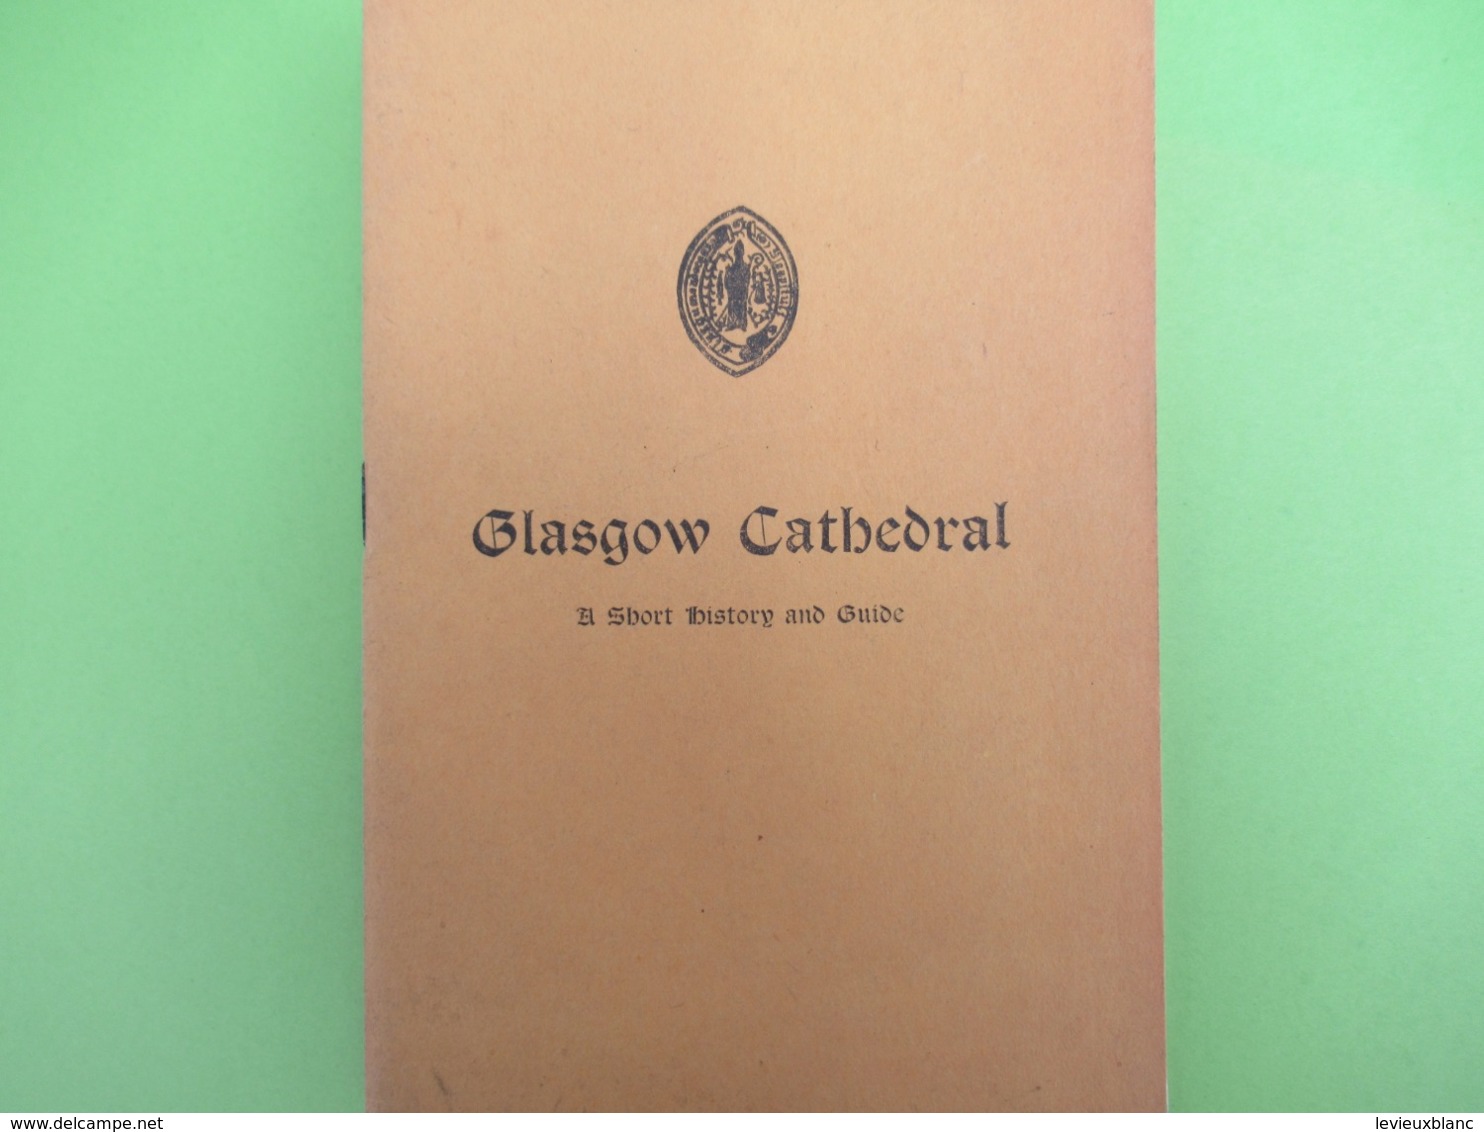 Guide Historique/A Short History And Guide/GLASGOW CATHEDRAL/A Nevile Davidson/Minister Of Glasgow/1938          PGC383 - Architektur